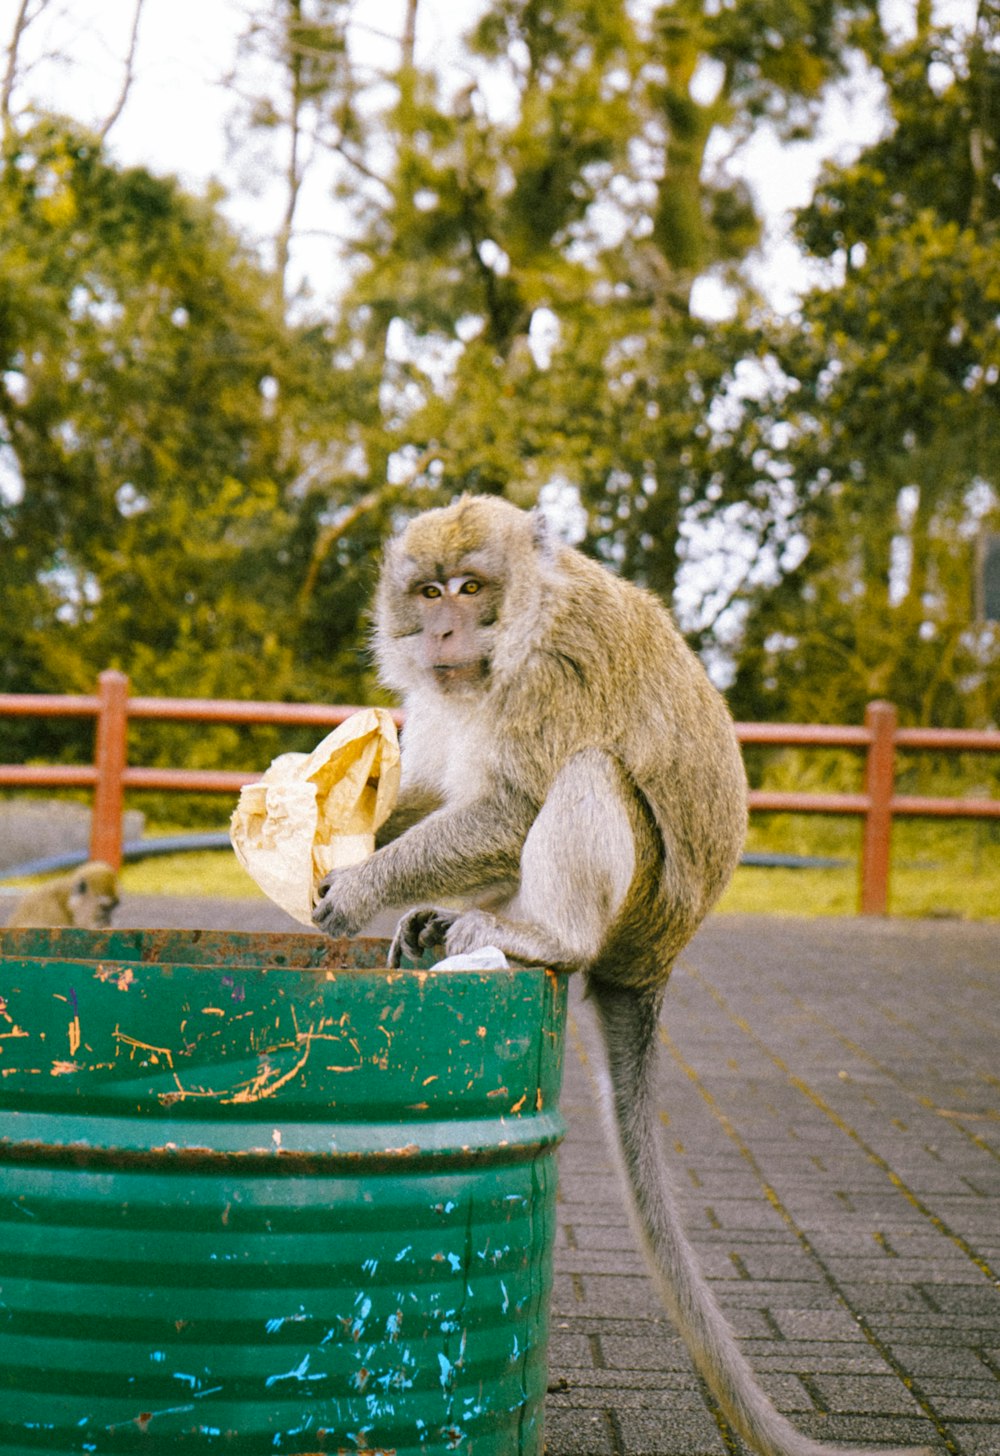 a monkey sitting on top of a green trash can